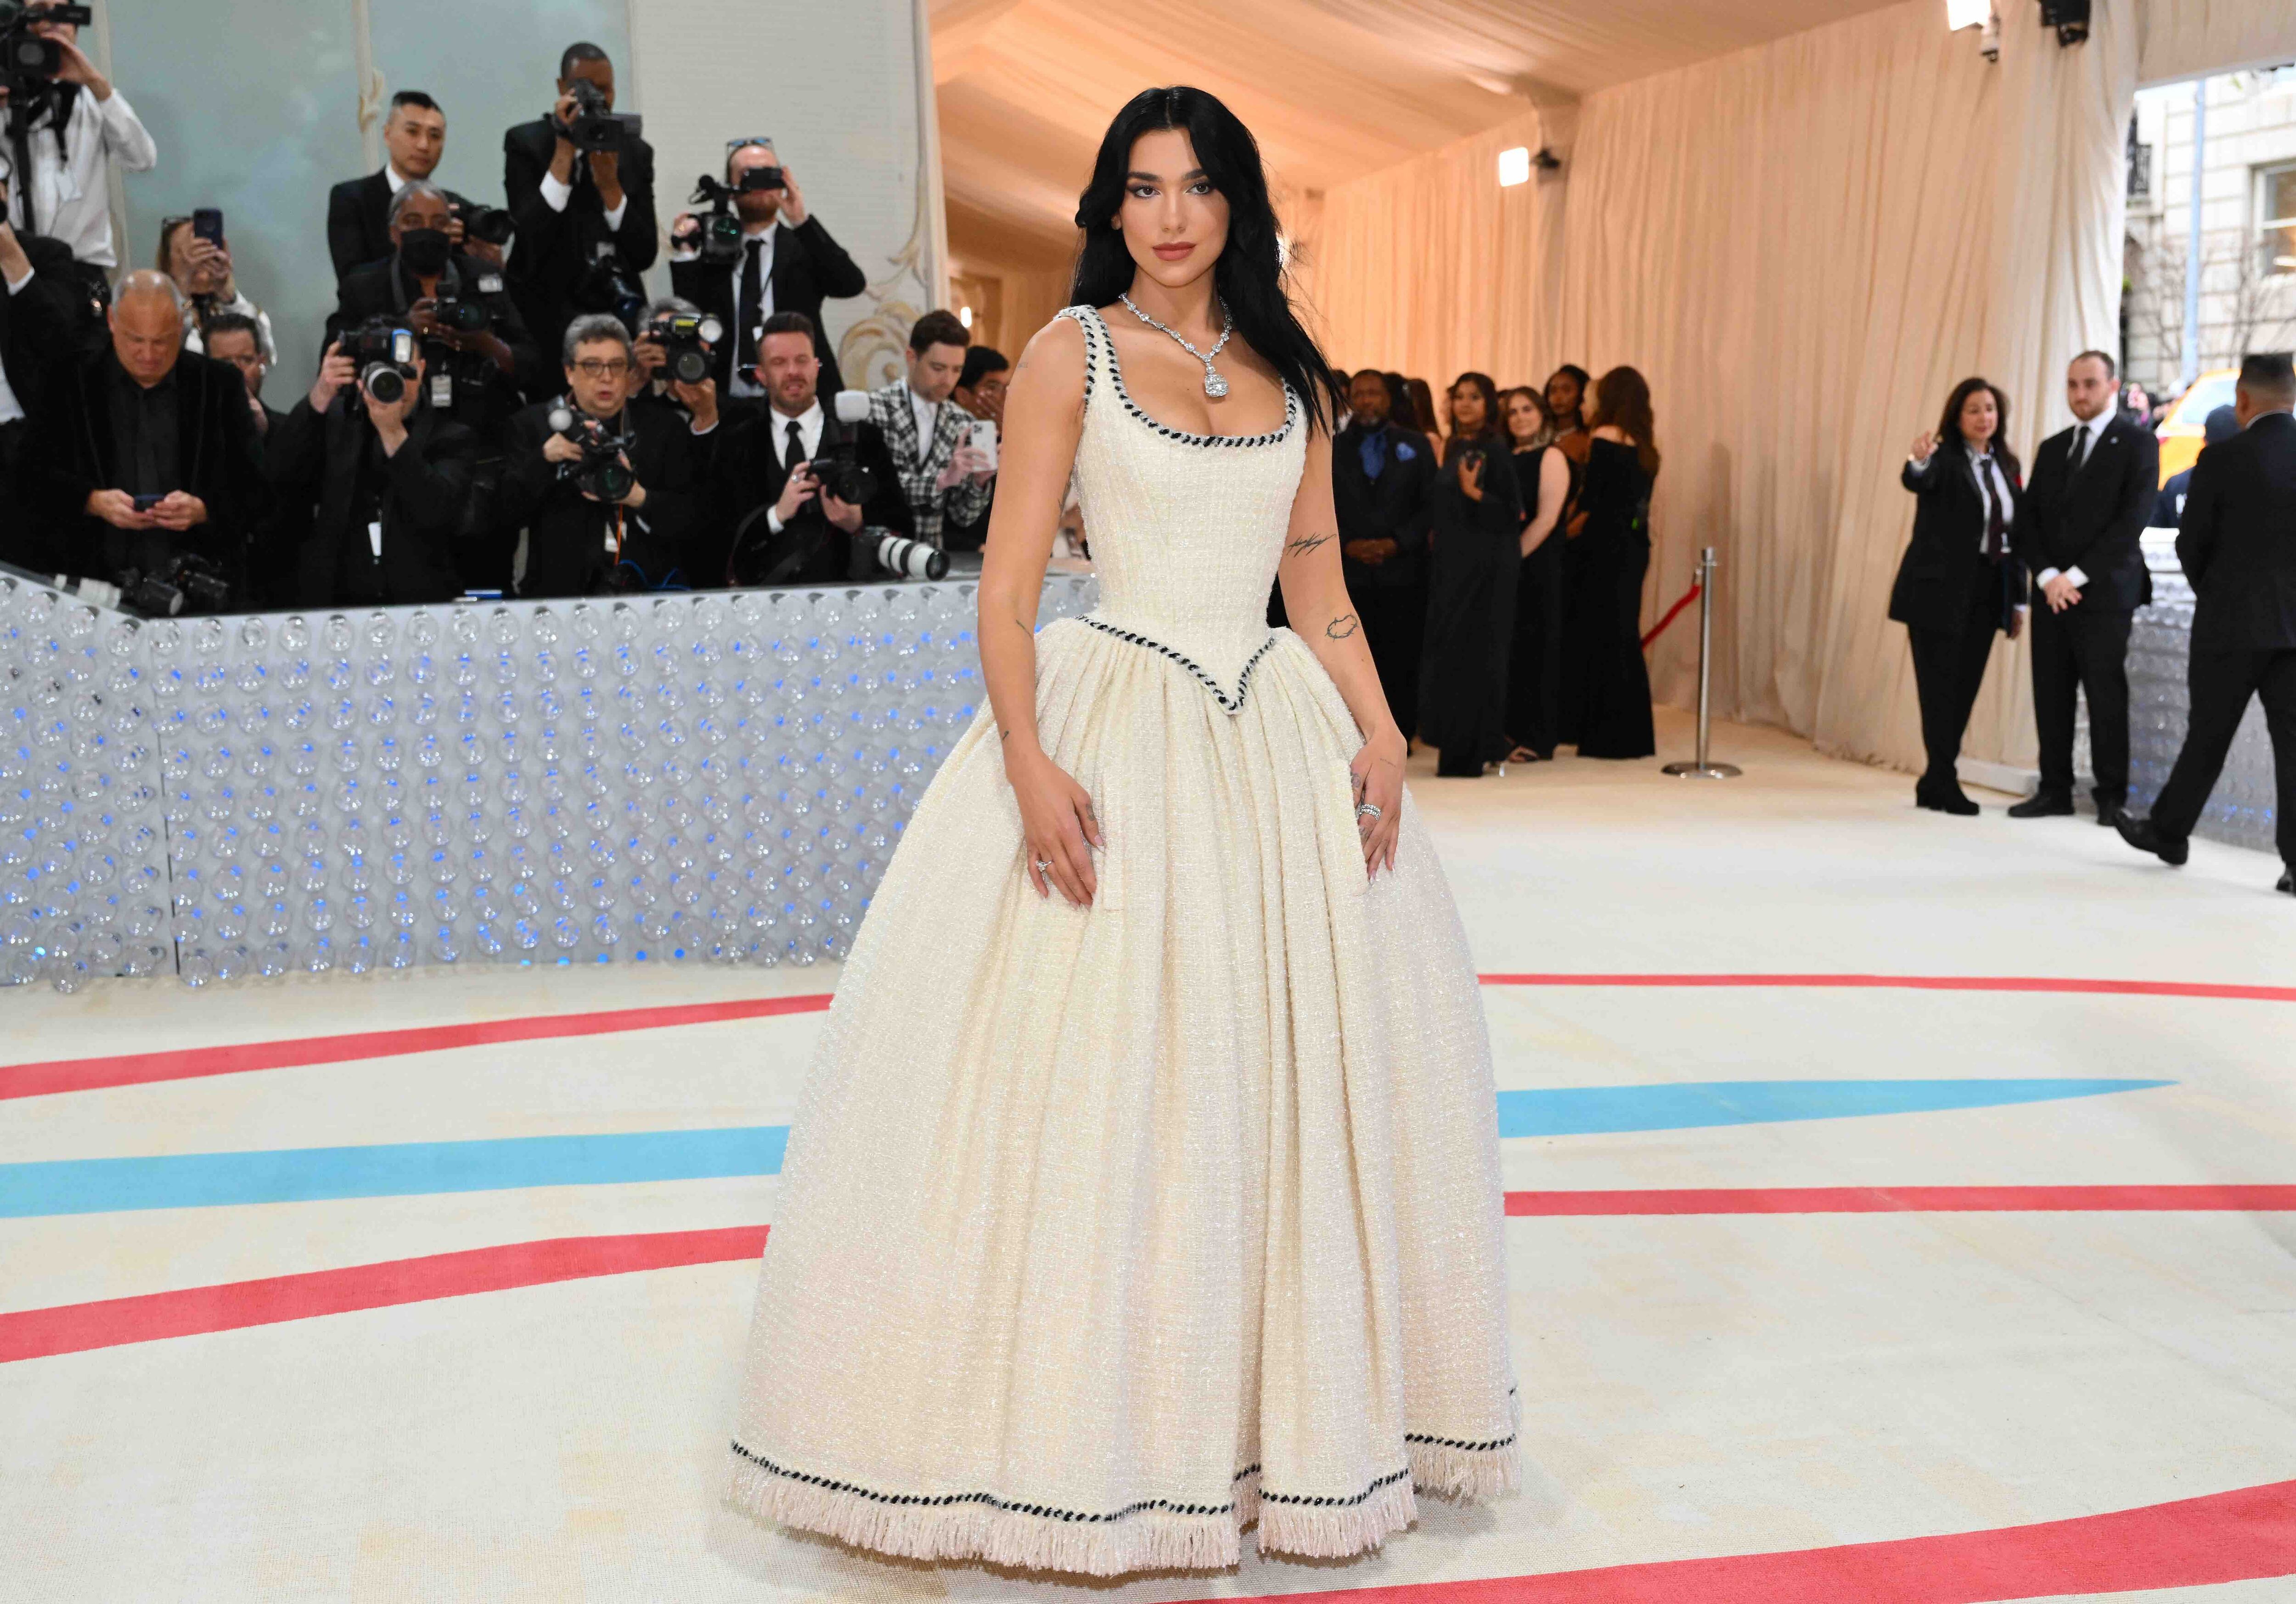 English singer-songwriter Dua Lipa arrives for the 2023 Met Gala at the Metropolitan Museum of Art on May 1, 2023, in New York. - The Gala raises money for the Metropolitan Museum of Art's Costume Institute. The Gala's 2023 theme is ìKarl Lagerfeld: A Line of Beauty.î (Photo by ANGELA WEISS / AFP)